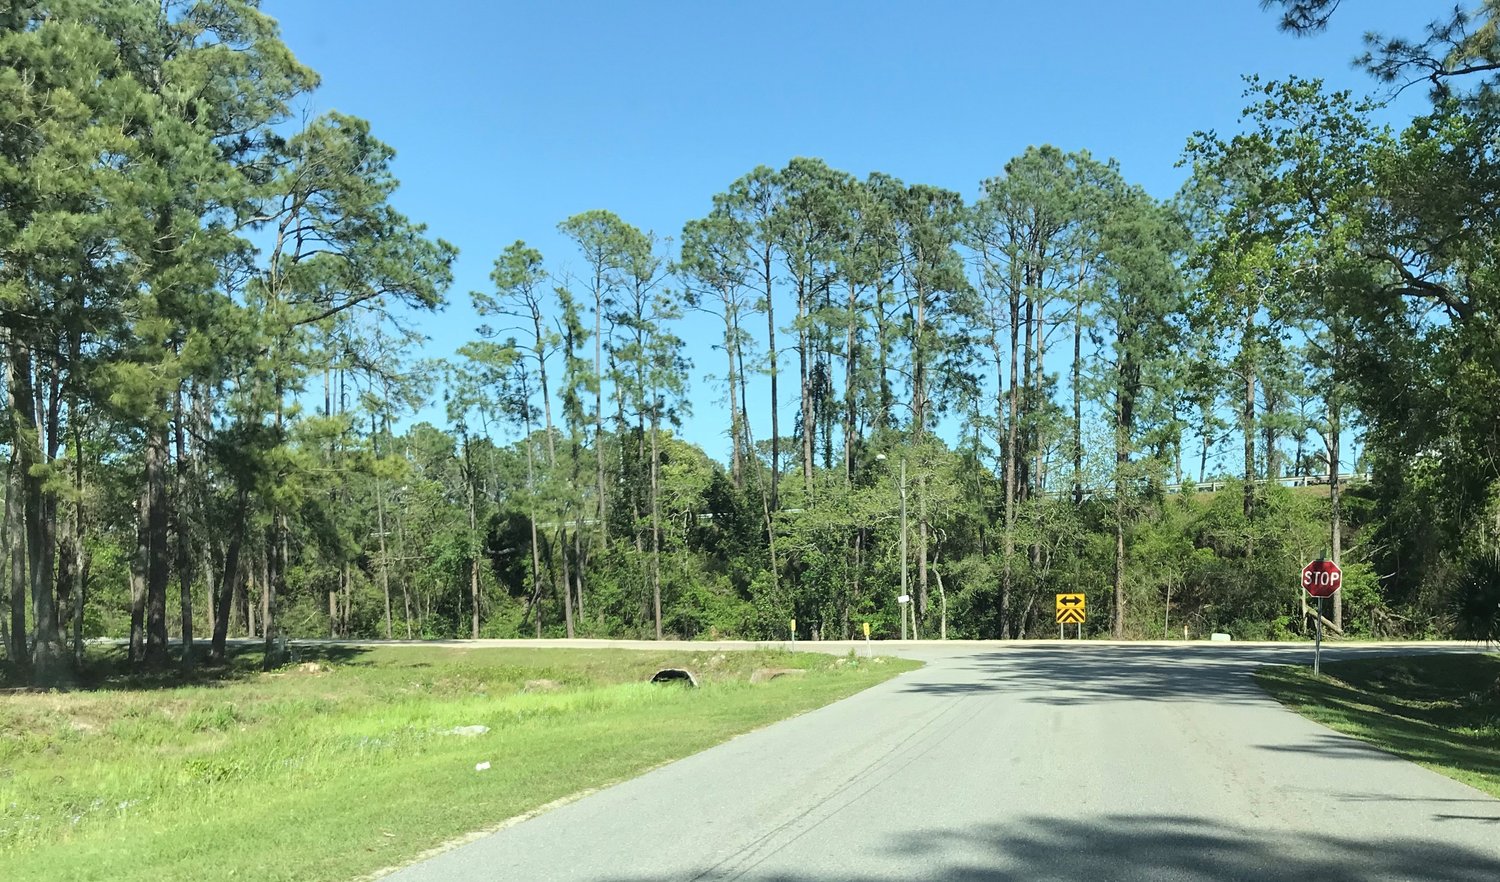 The city of Gulf Shores is working on plans for a $3.55-million project to improve Waterway West Boulevard, located north of the Intracoastal Waterway. The City Council voted to begin designs for the work, which is included in the 2022 budget.